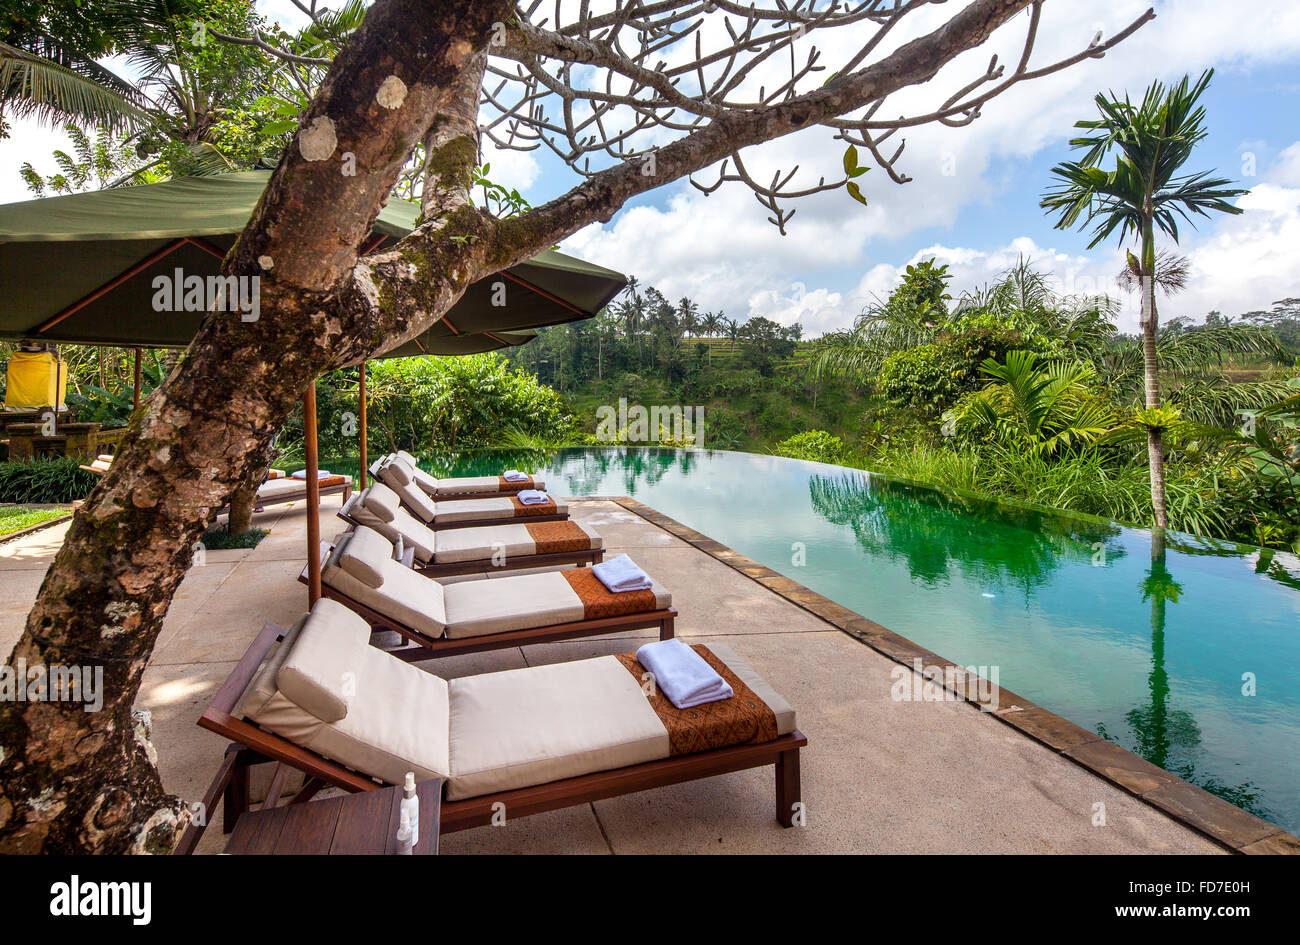 Hotel resort with pool and palm trees, Ubud, Bali, Indonesia, Asia Stock Photo